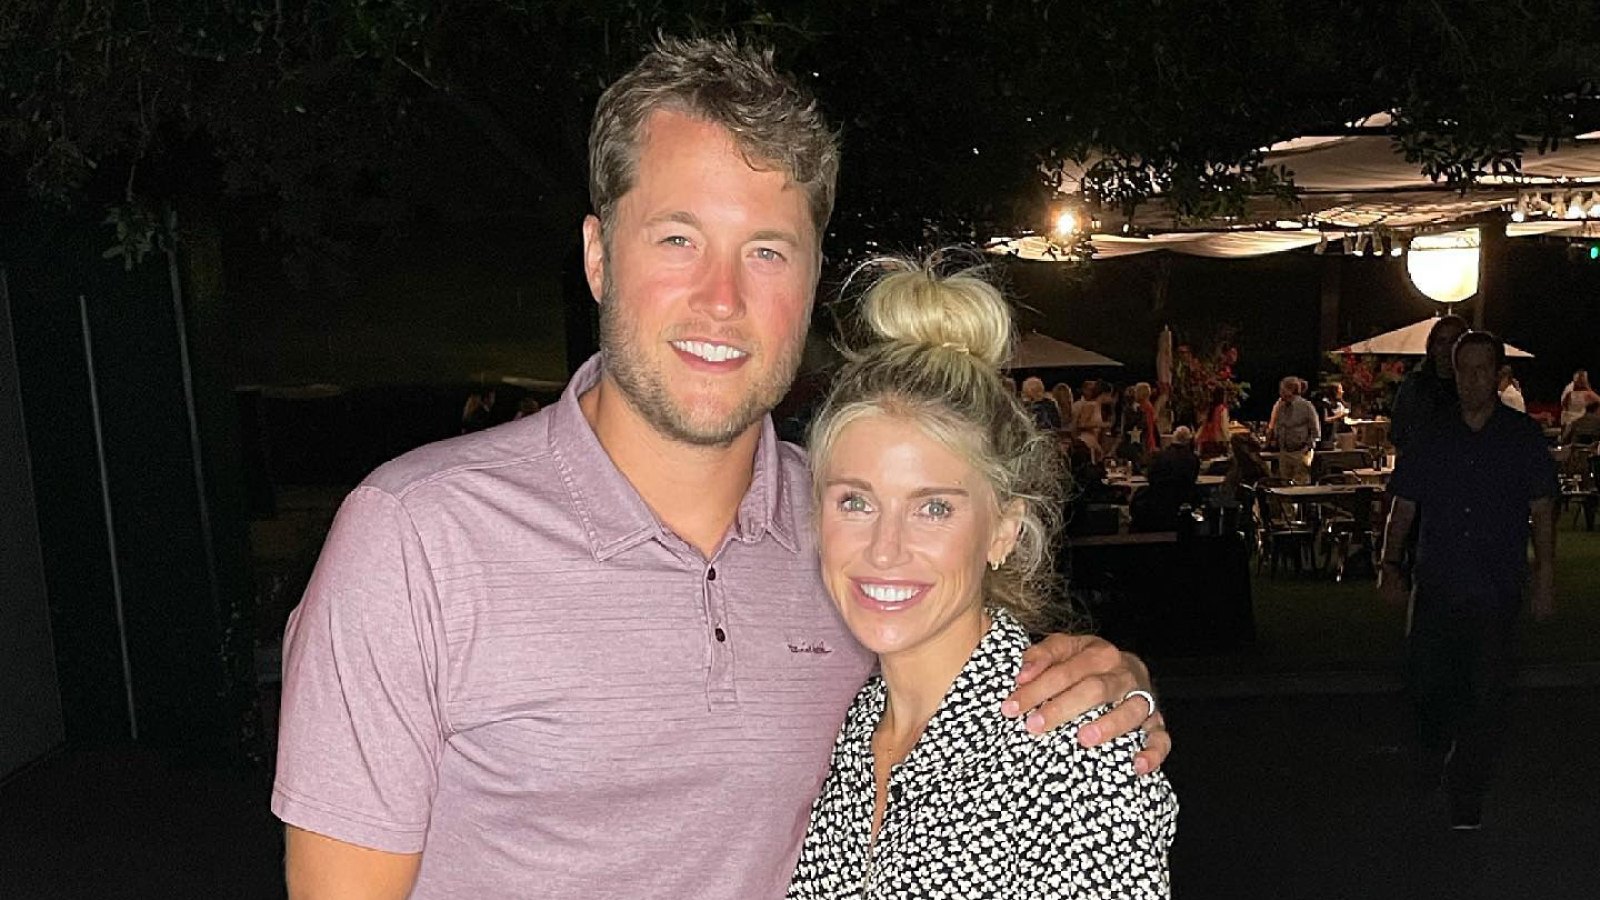 Matthew Stafford's Wife Kelly Stafford Is Hoping for Rams Win